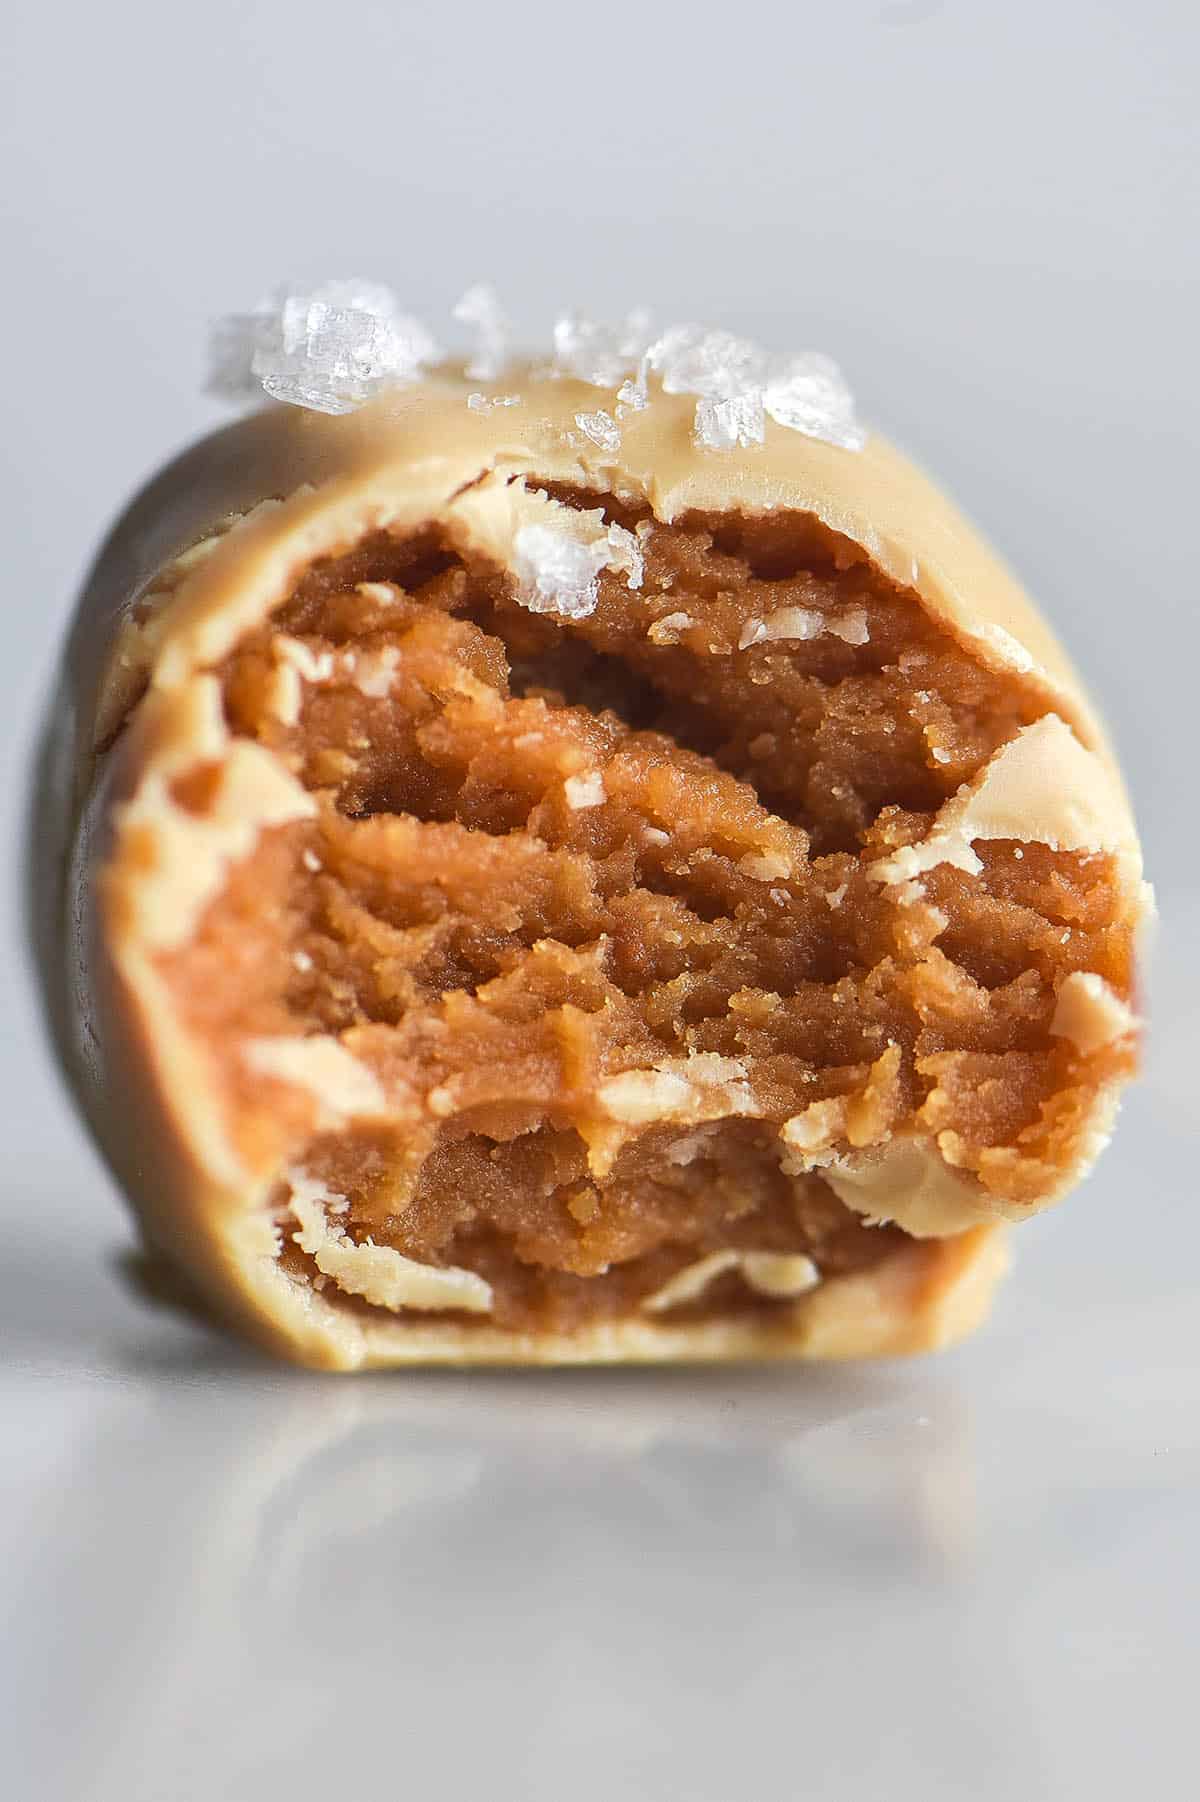 A close up side on image of a peanut butter truffle coated in white chocolate. A bite has been taken, revealing the peanut butter centre, and sea salt flakes adorn the top. The truffle sits atop a white marble table against a white backdrop